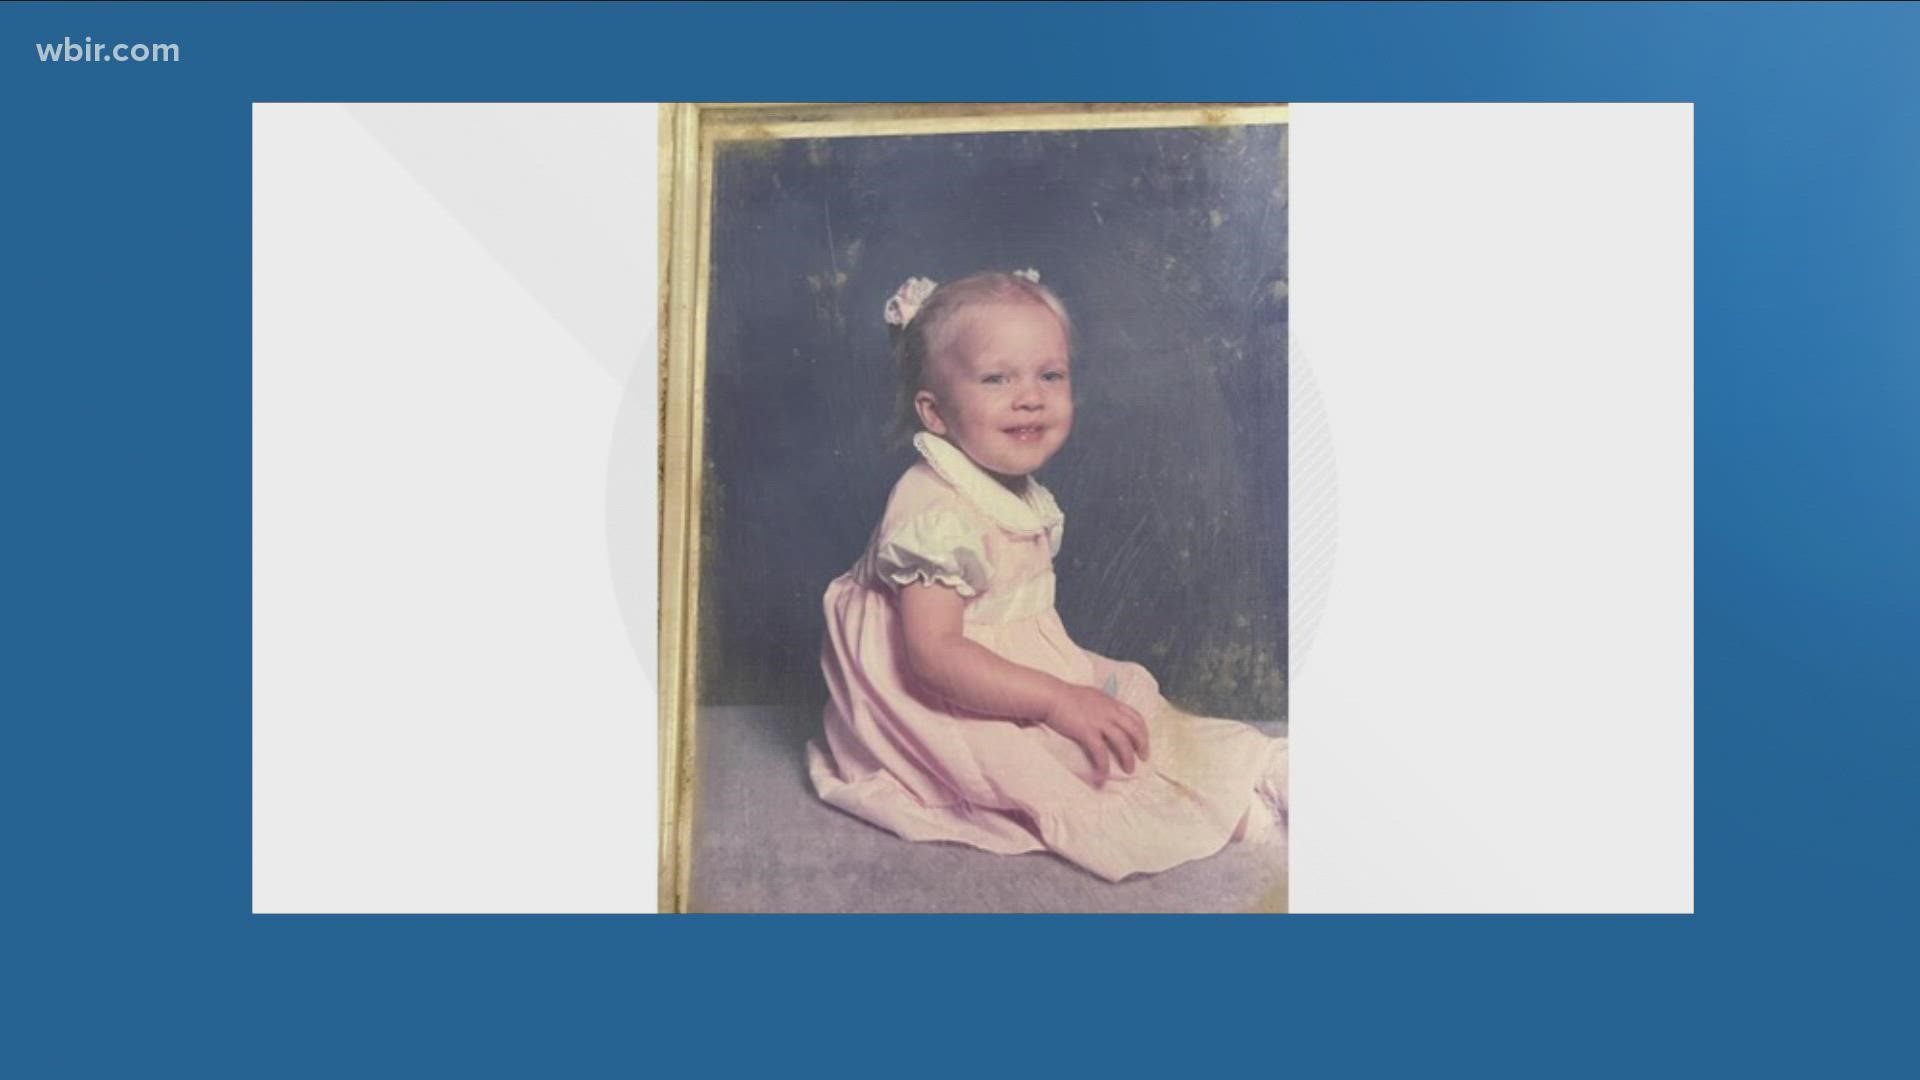 The family had purchased property in Kodak with a burned down house. While searching through the wreckage, they found the picture of the young girl.